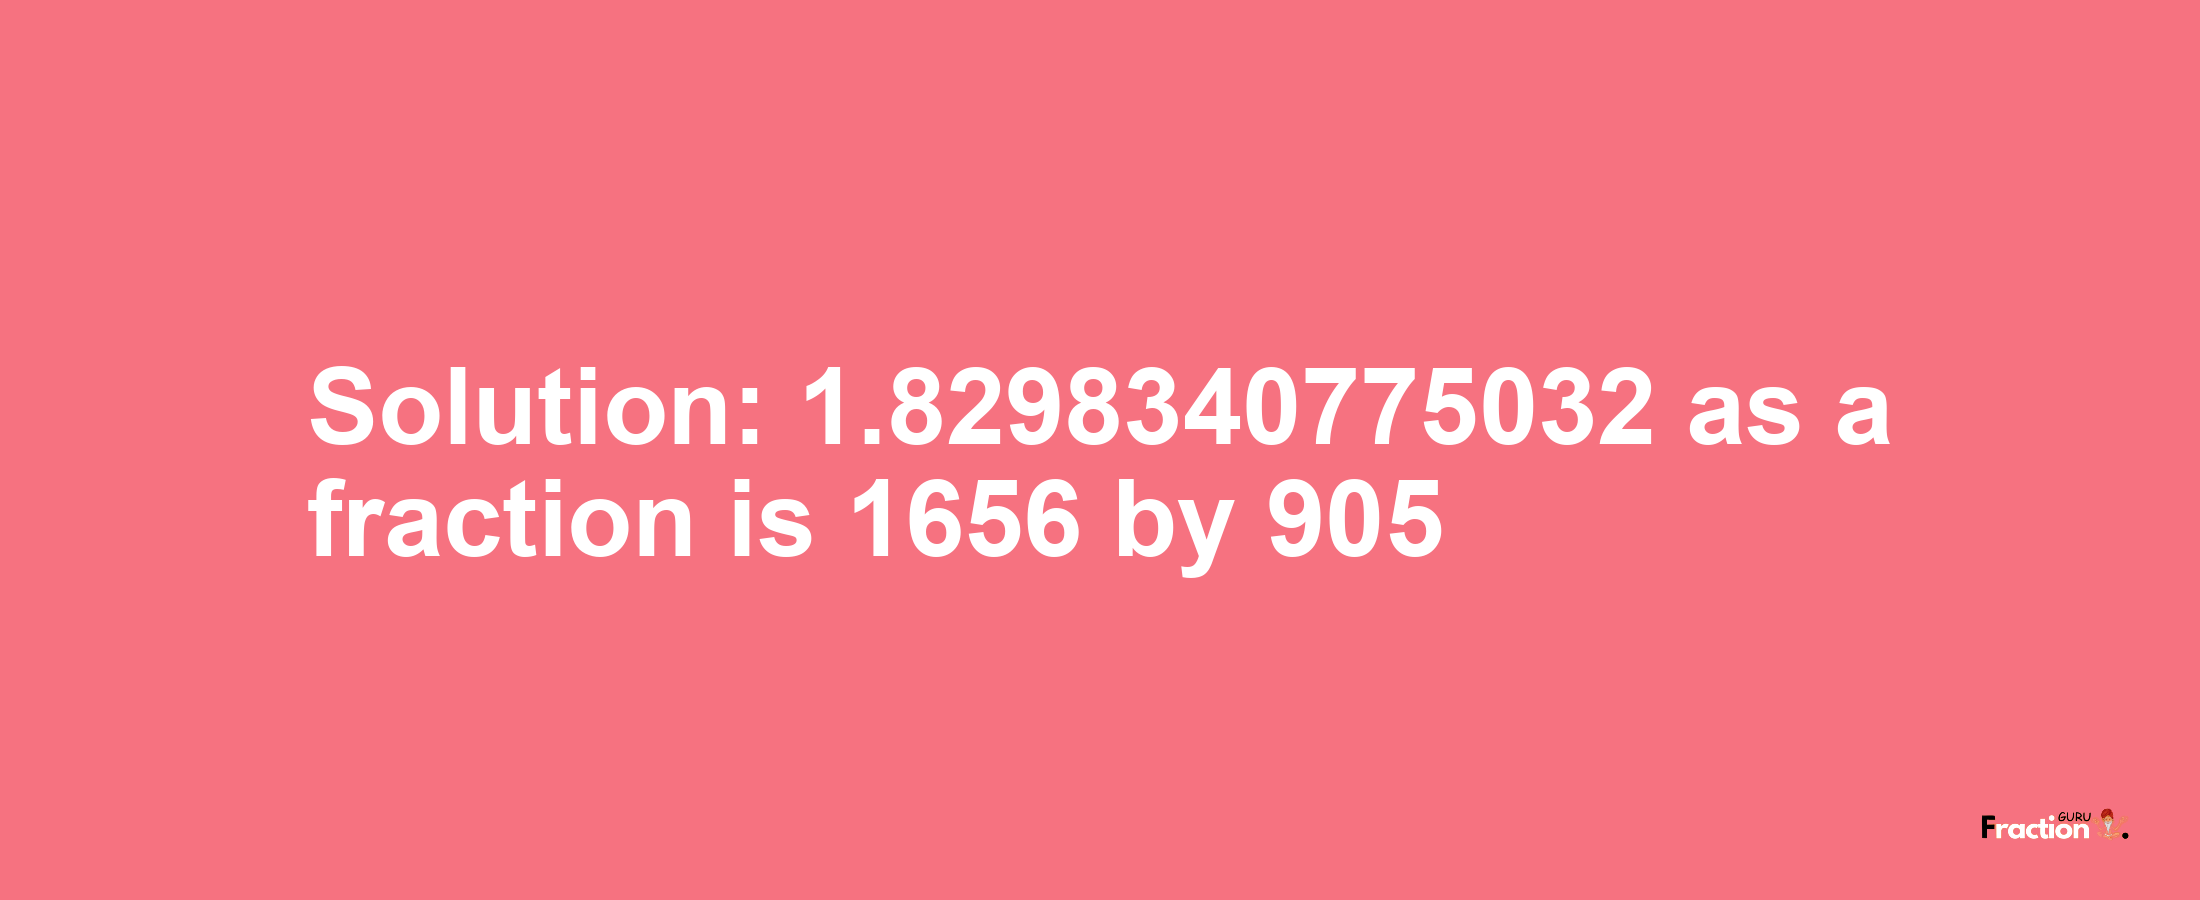 Solution:1.8298340775032 as a fraction is 1656/905